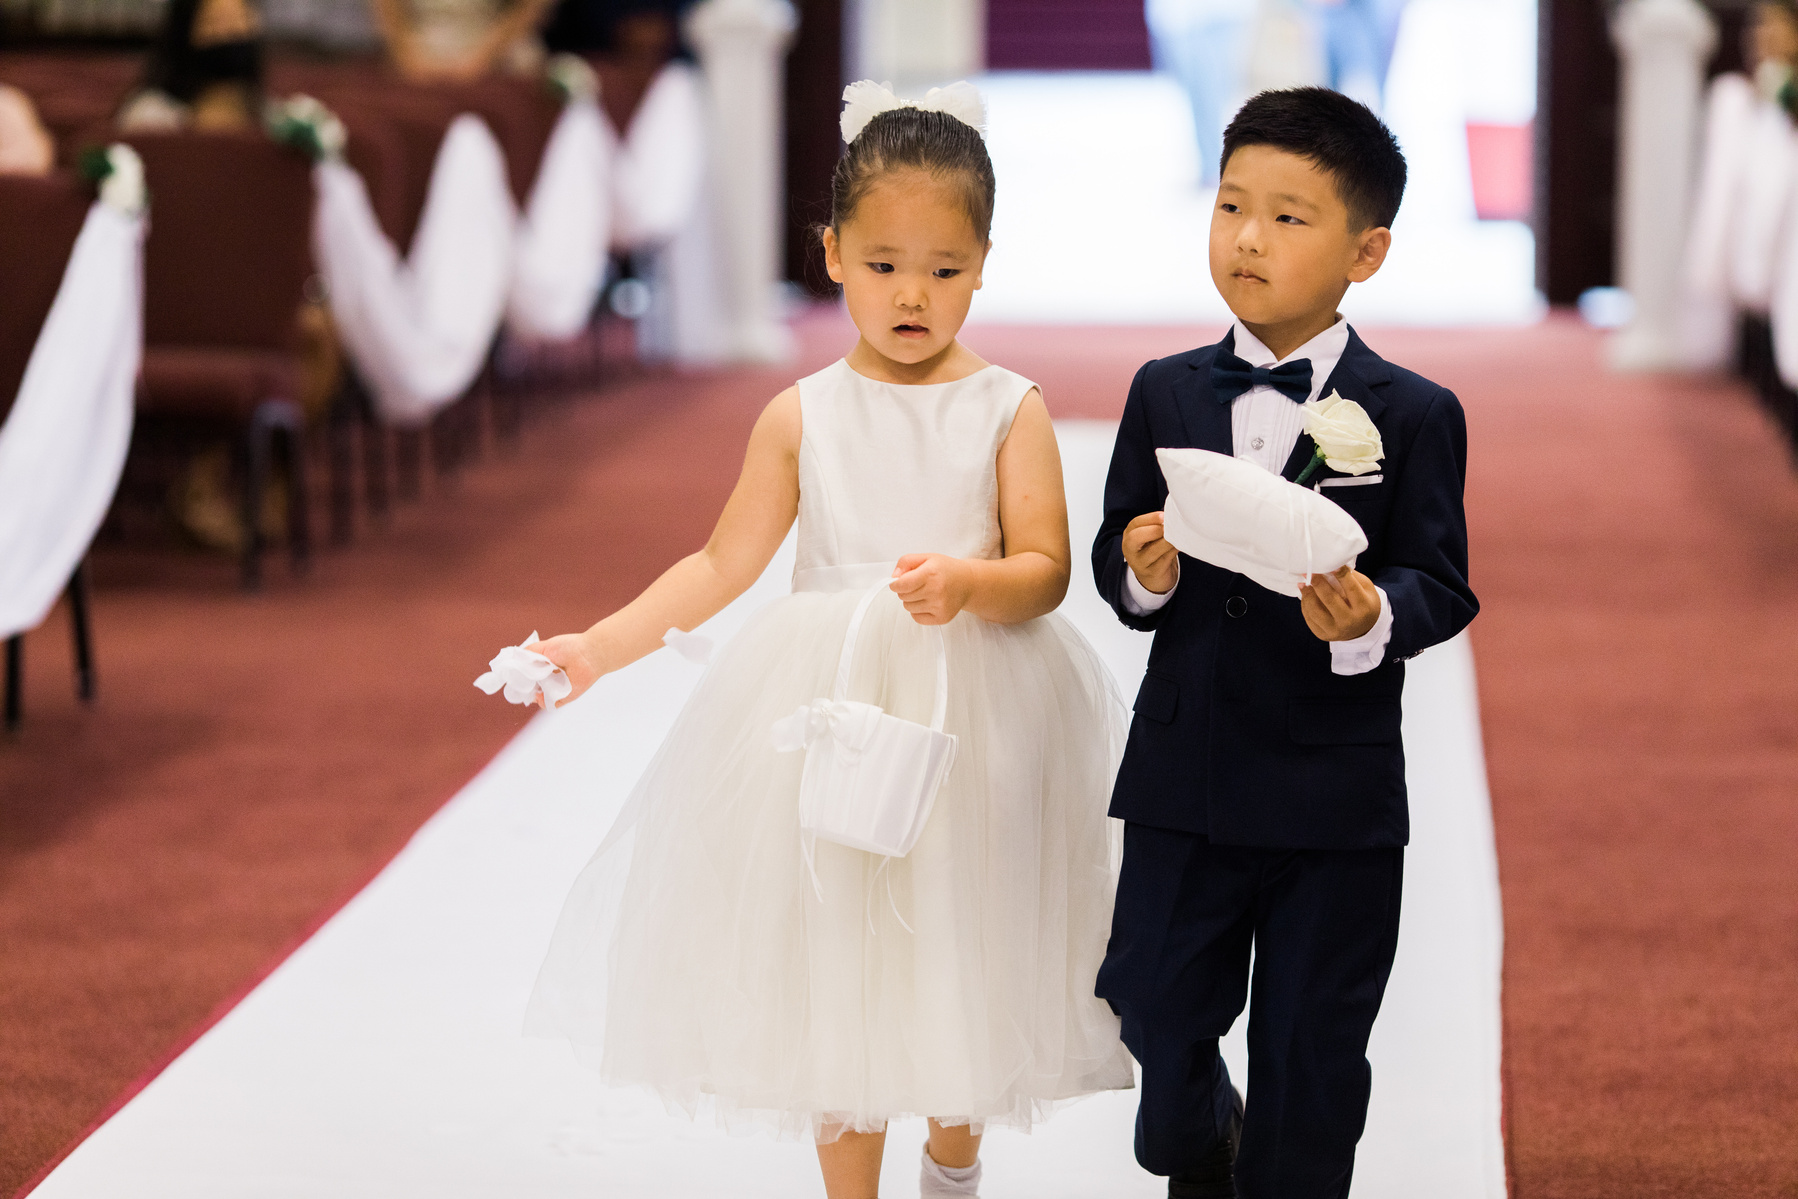 flower girl and ring bearer walking down the wedding aisle in a church